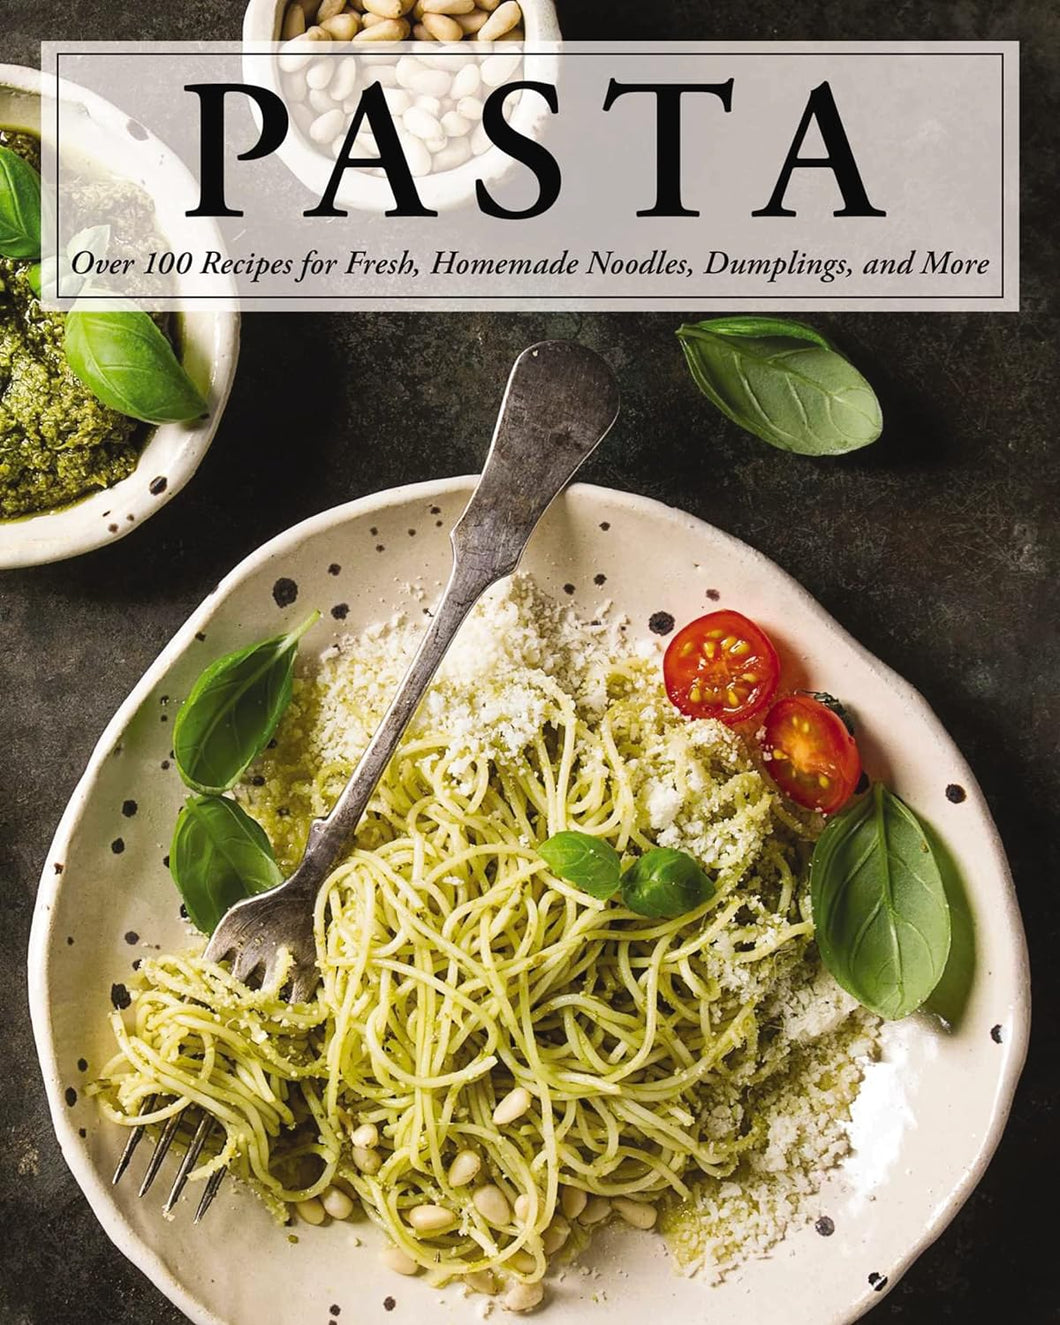 Pasta: Over 100 Recipes for Fresh, Homemade Noodles, Dumplings, and More